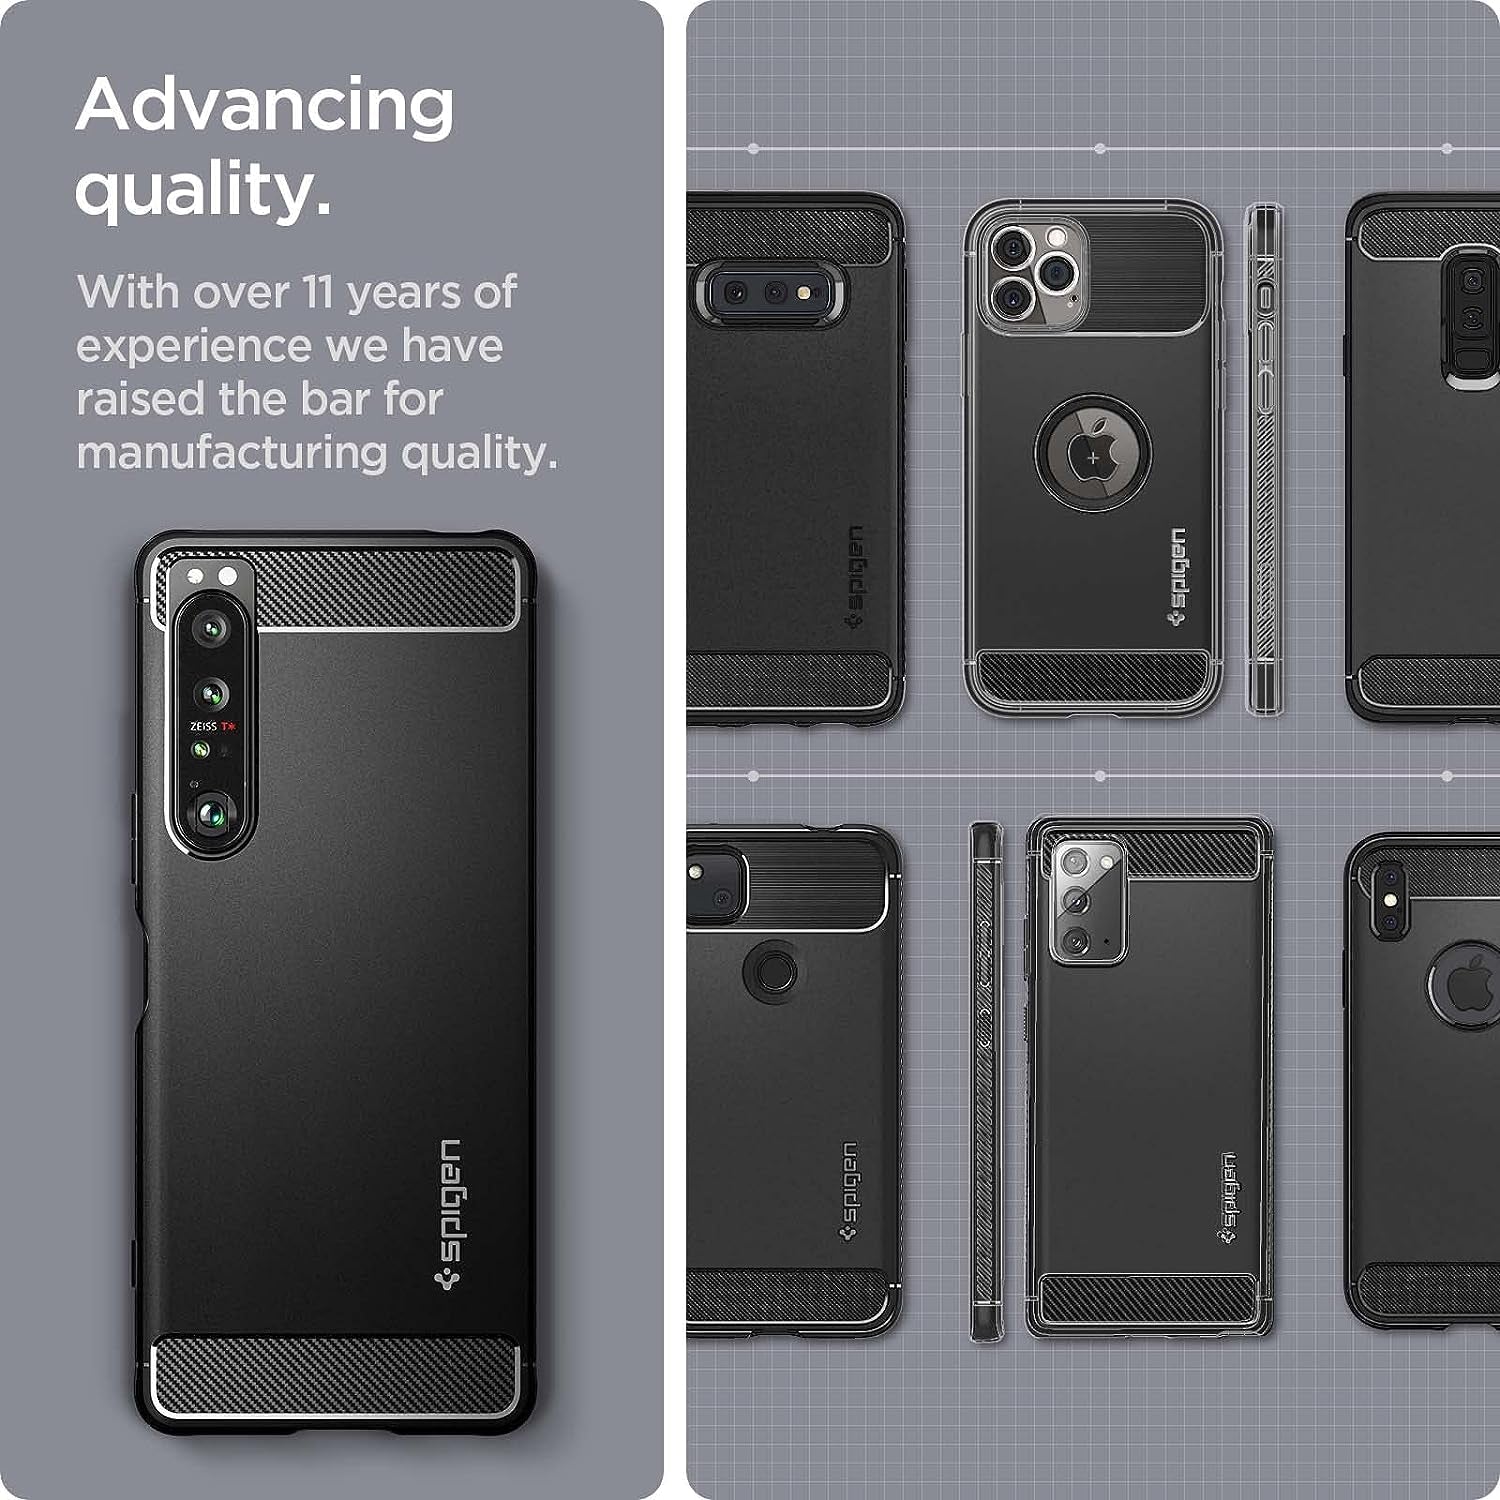 Spigen Rugged Armor Matte Black Case - For Sony Xperia 1 IV - mosaccessories